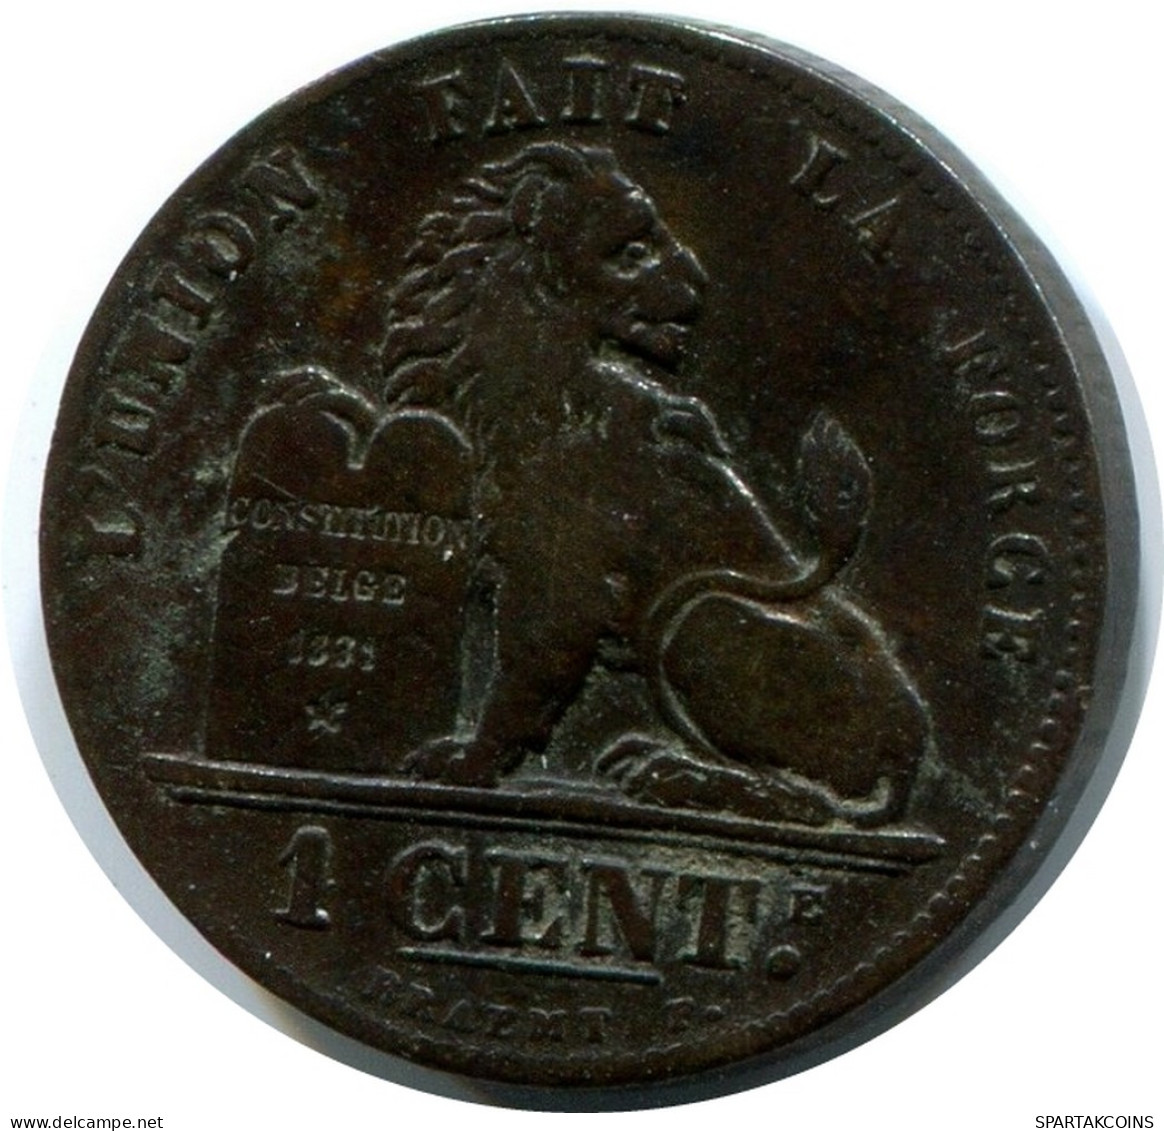 1 CENTIME 1899 BELGIUM Coin FRENCH Text #AX354.U - 1 Cent